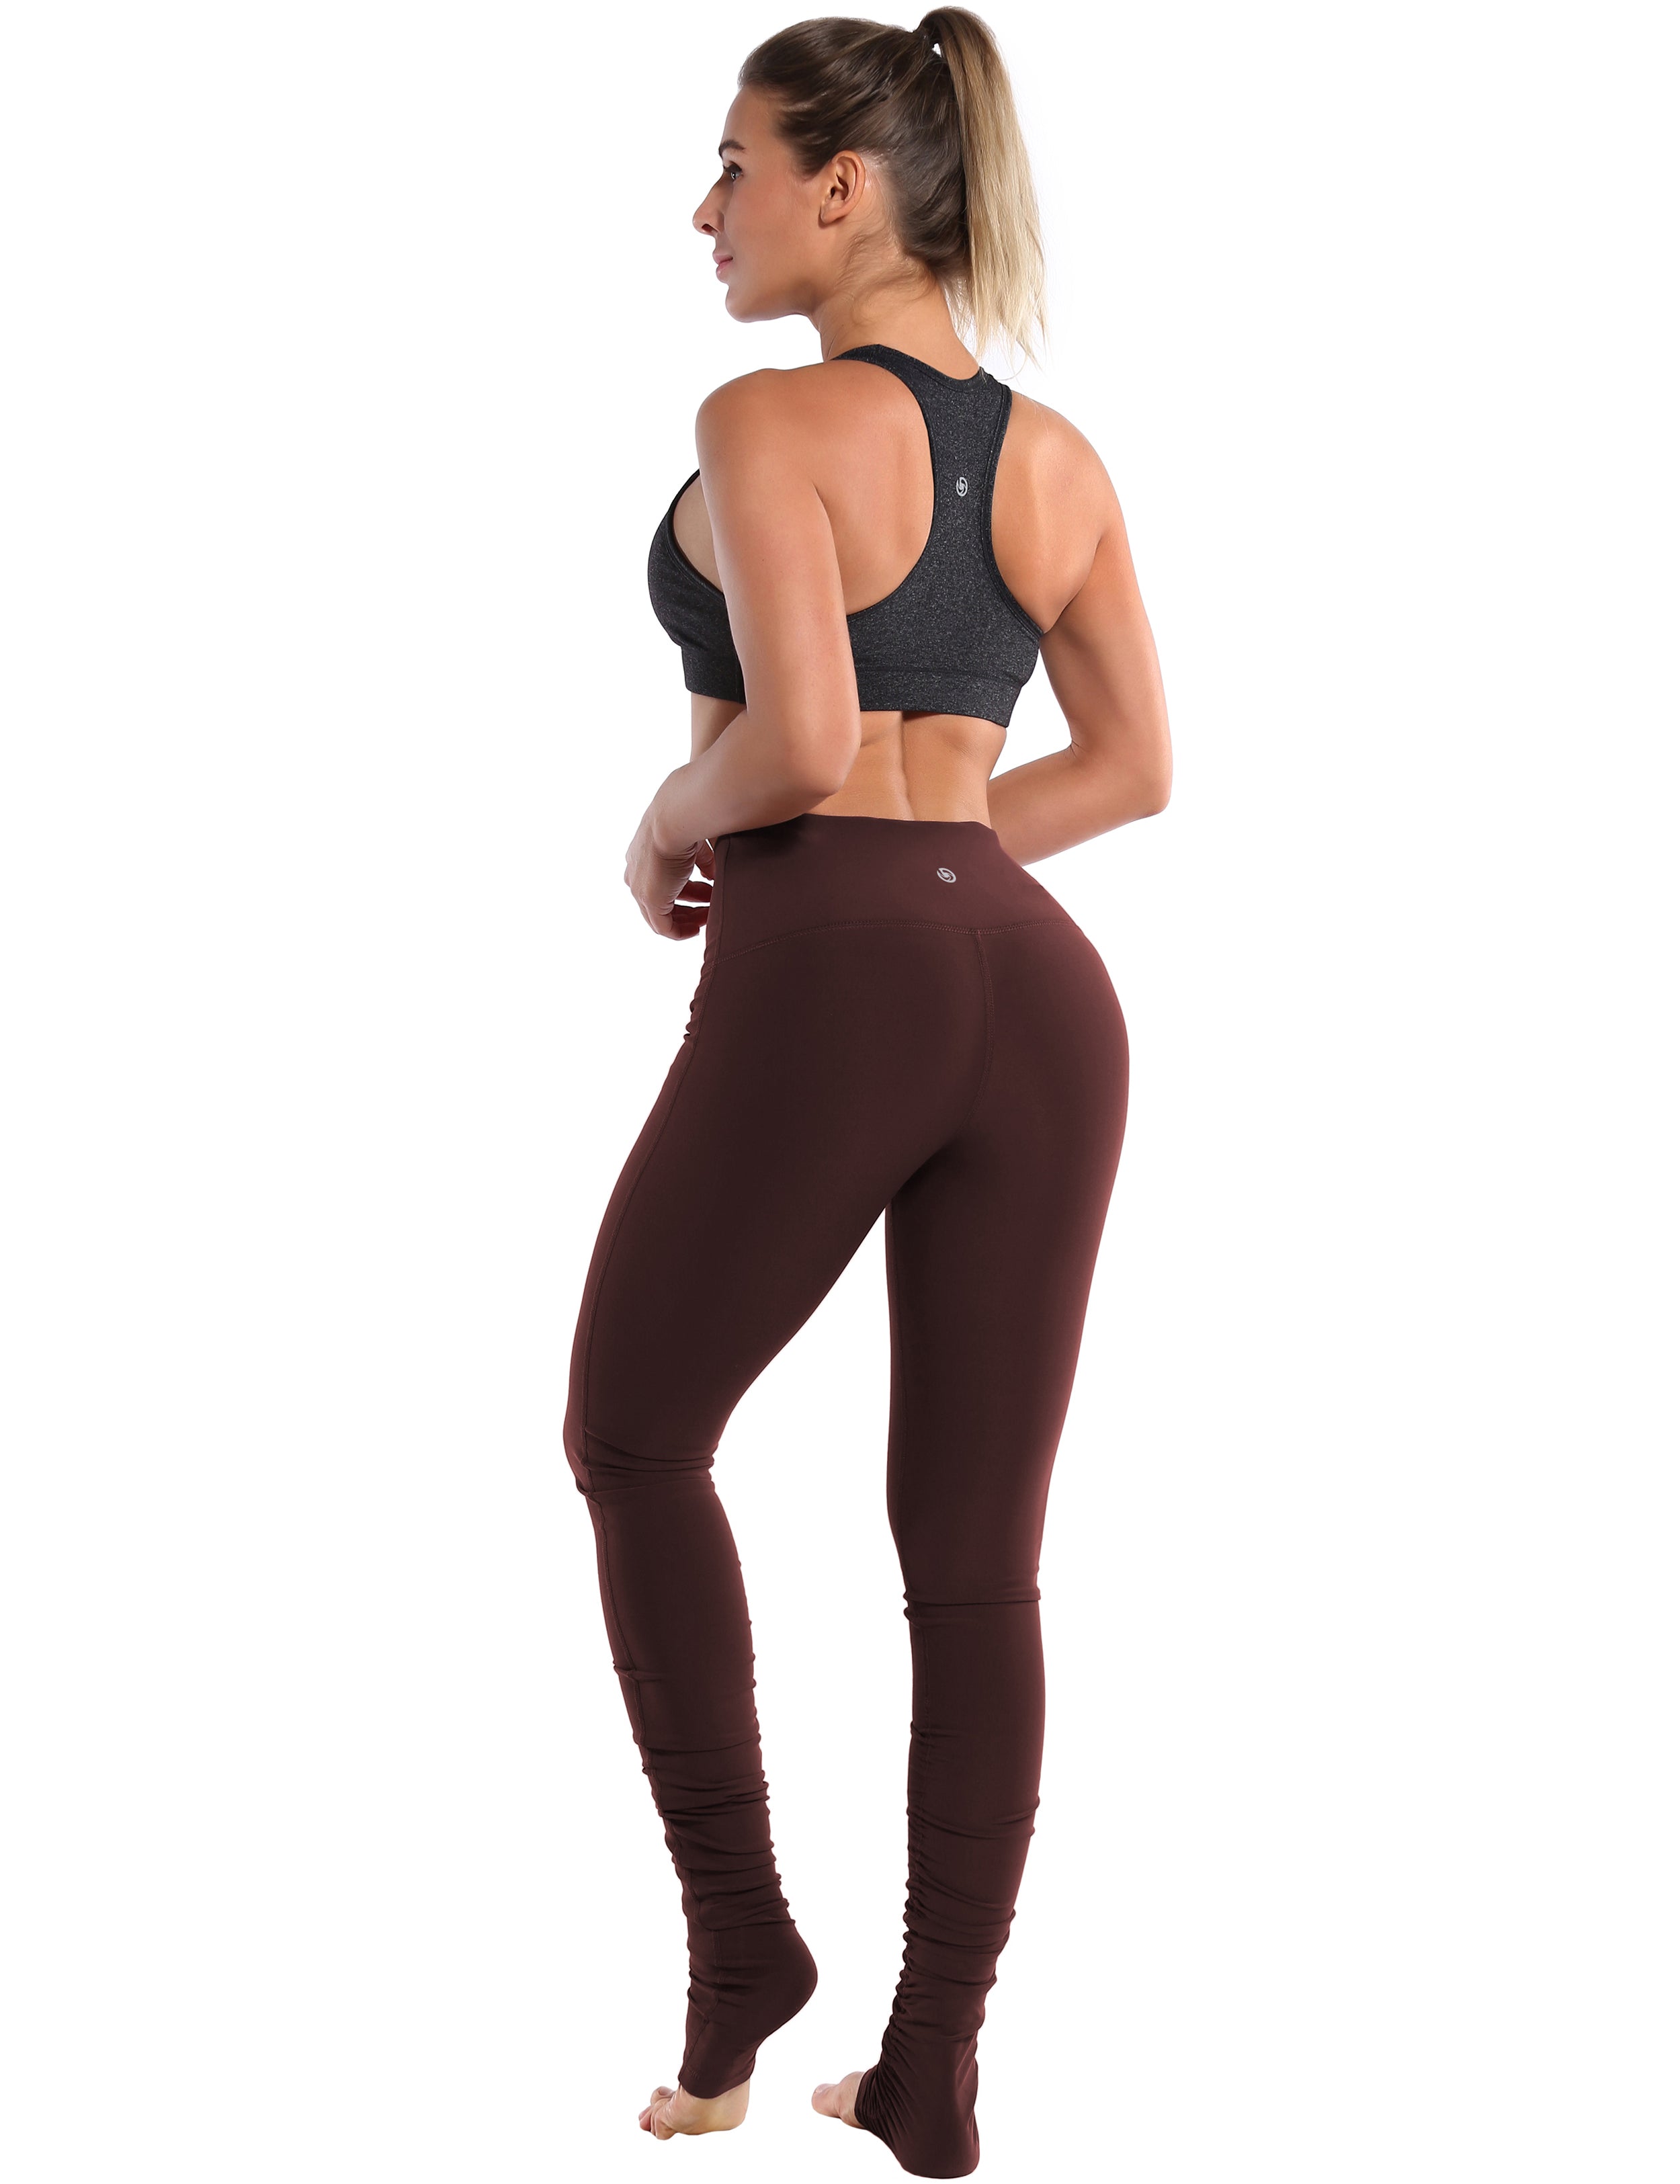 Over the Heel Golf Pants mahoganymaroon Over the Heel Design 87%Nylon/13%Spandex Fabric doesn't attract lint easily 4-way stretch No see-through Moisture-wicking Tummy control